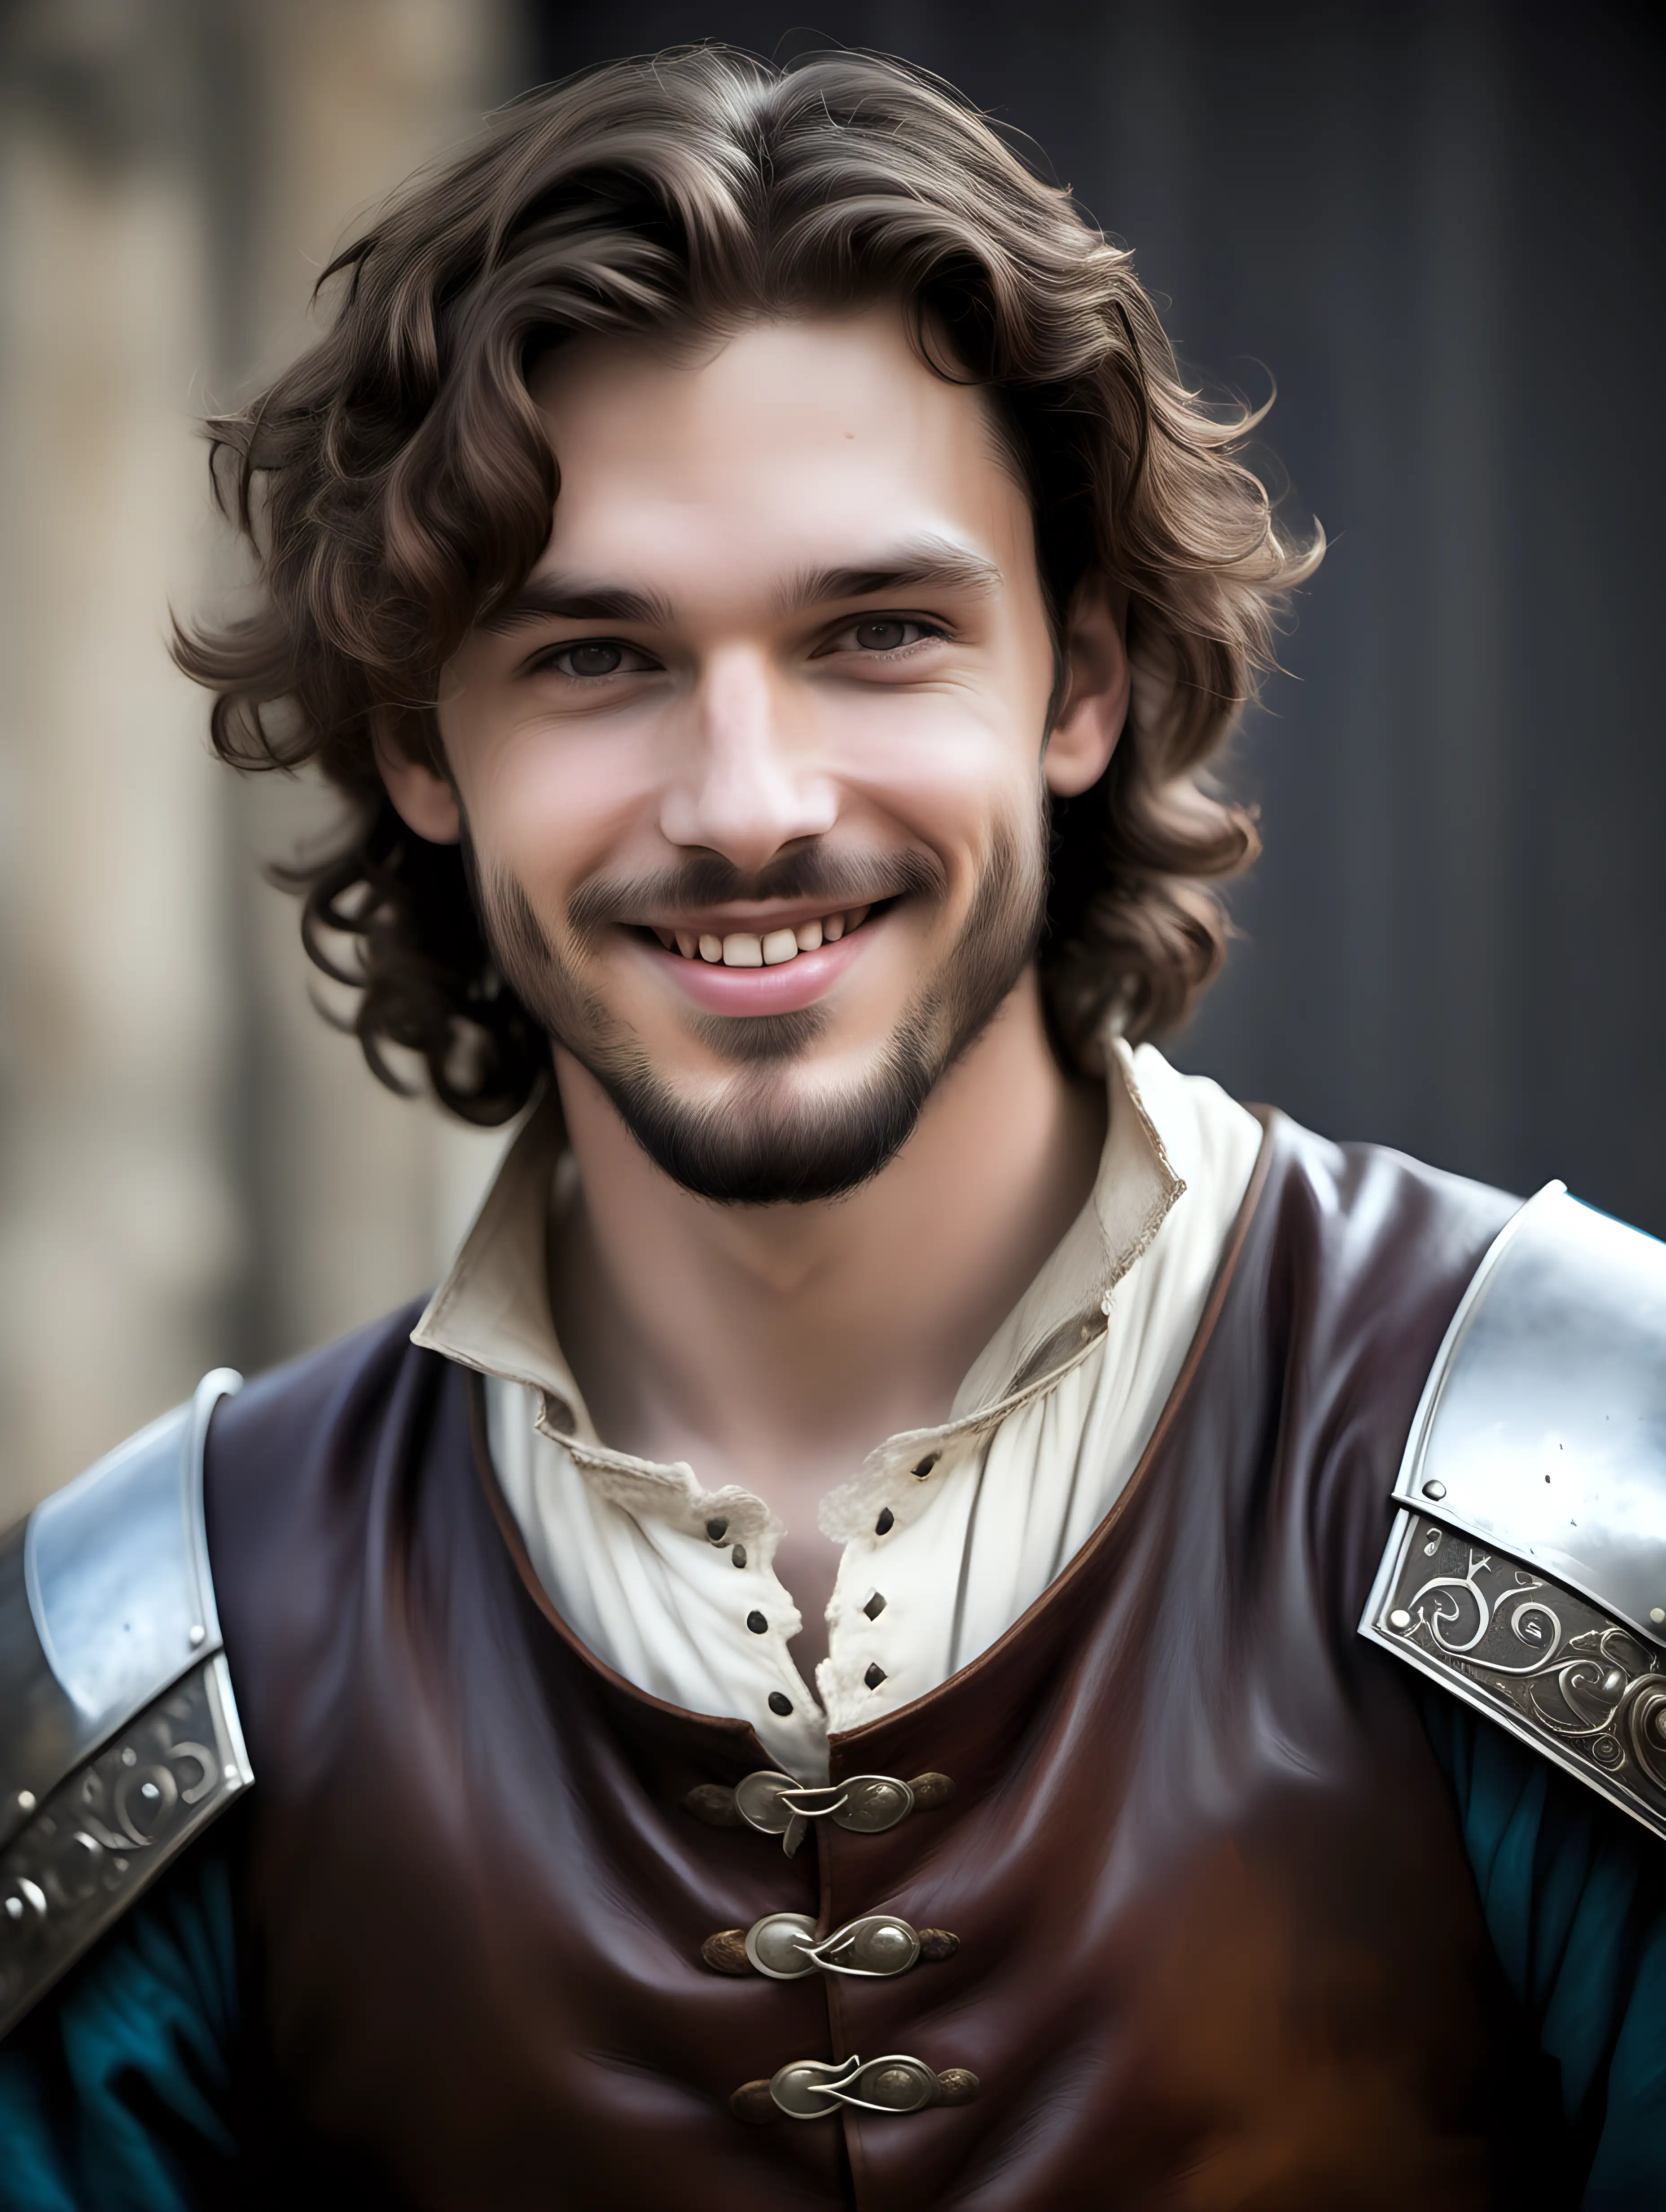 Charming Medieval Prince with Wavy Brown Hair and Hairy Chest Smiles Gently